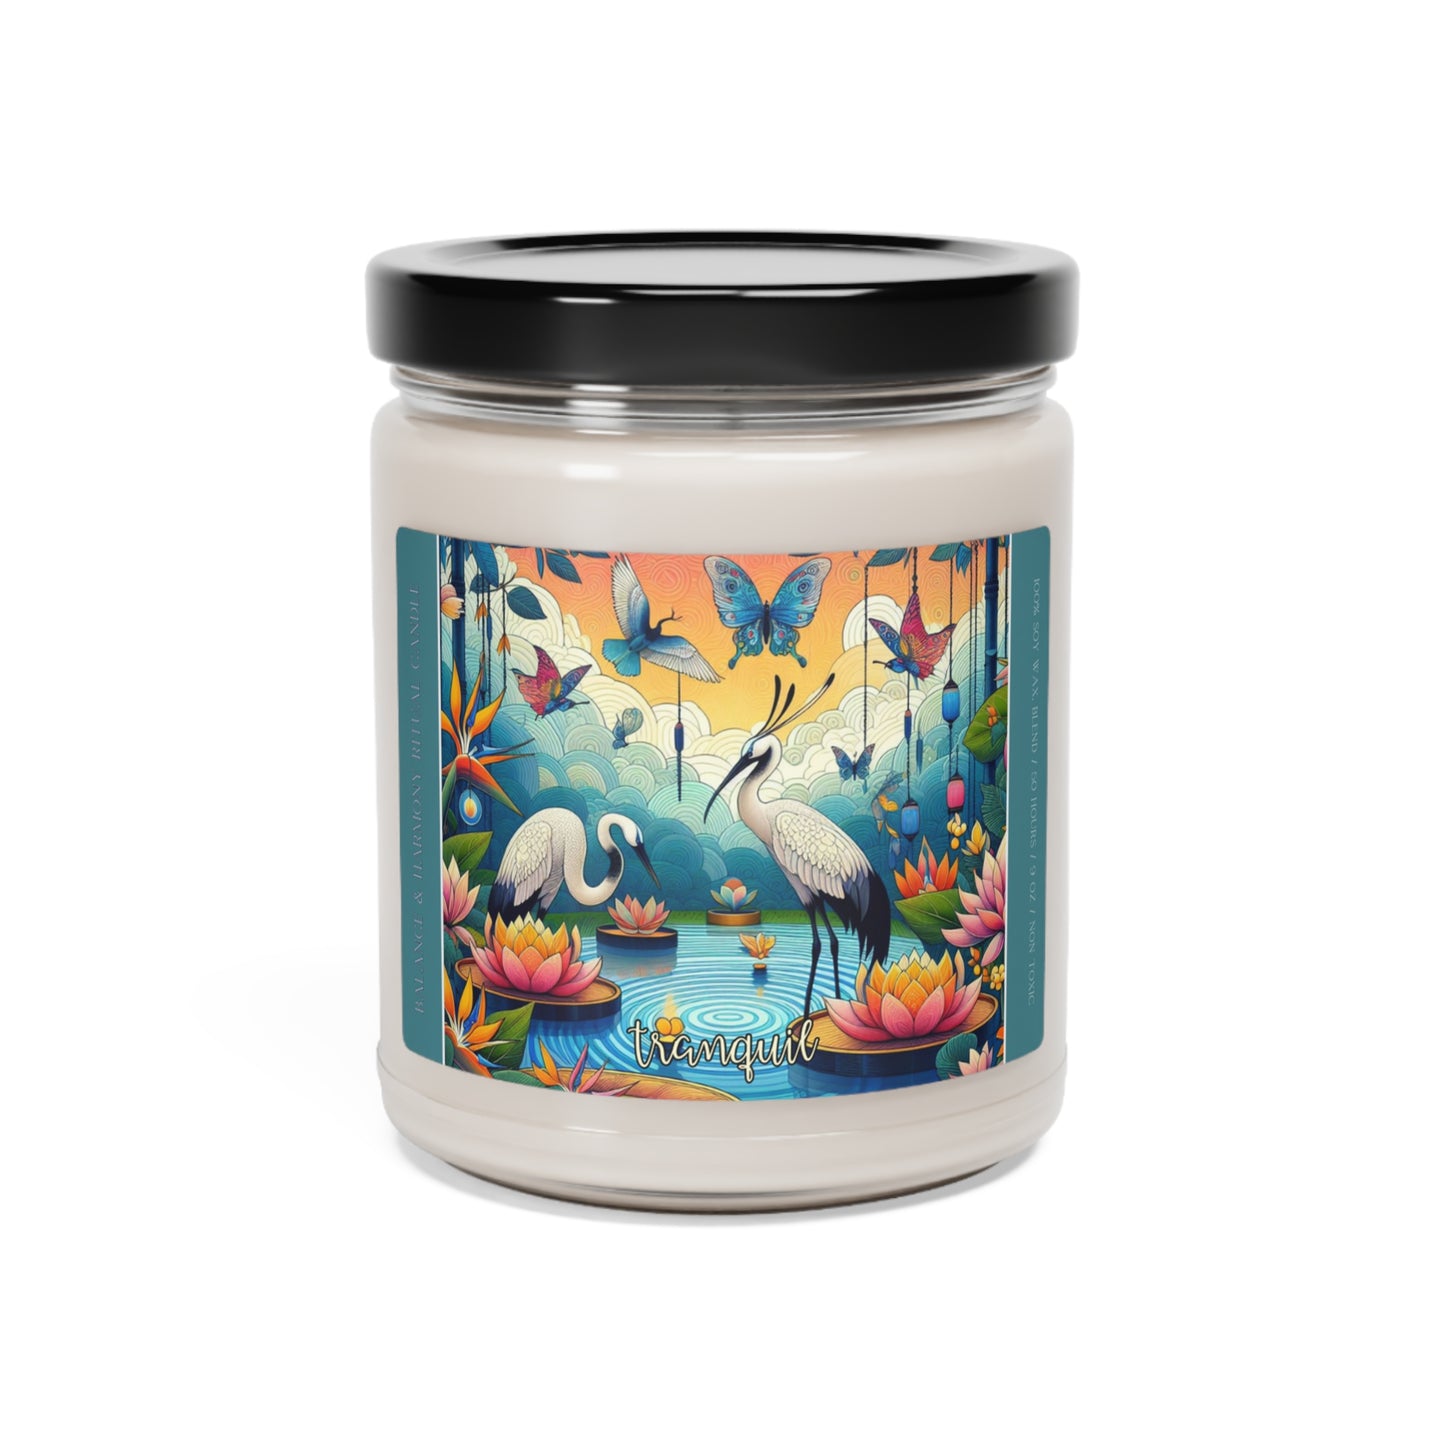 TRANQUIL: BALANCE & HARMONY RITUAL CANDLE, Scented Soy Candle, 9oz